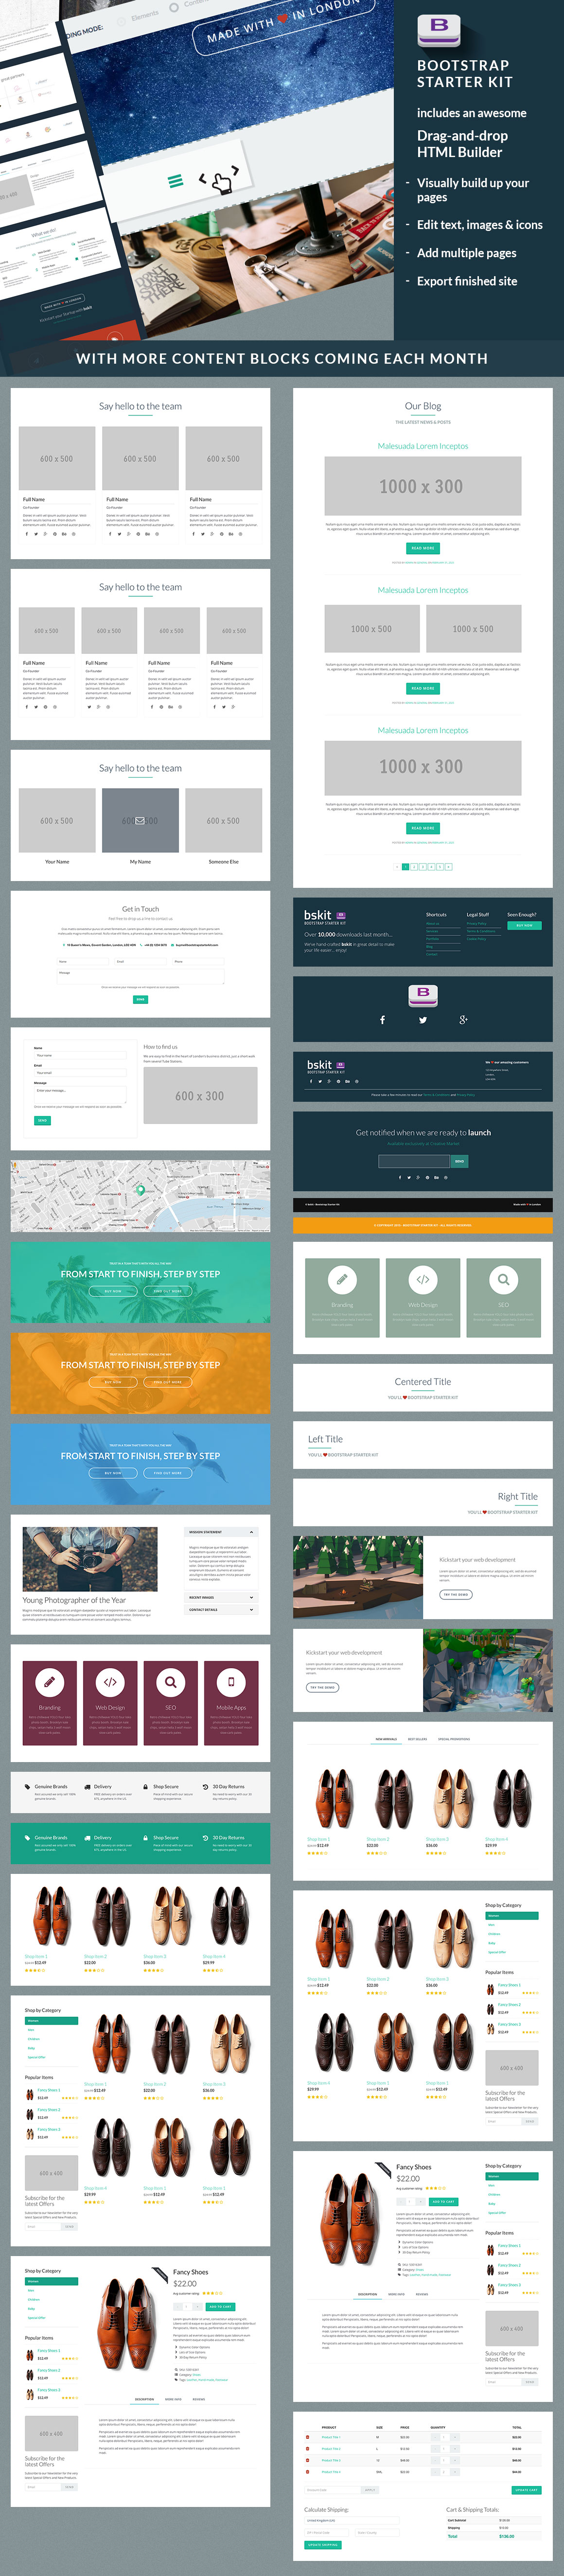 Download Bootstrap Starter Kit - Web Edition ~ Bootstrap Themes on ...